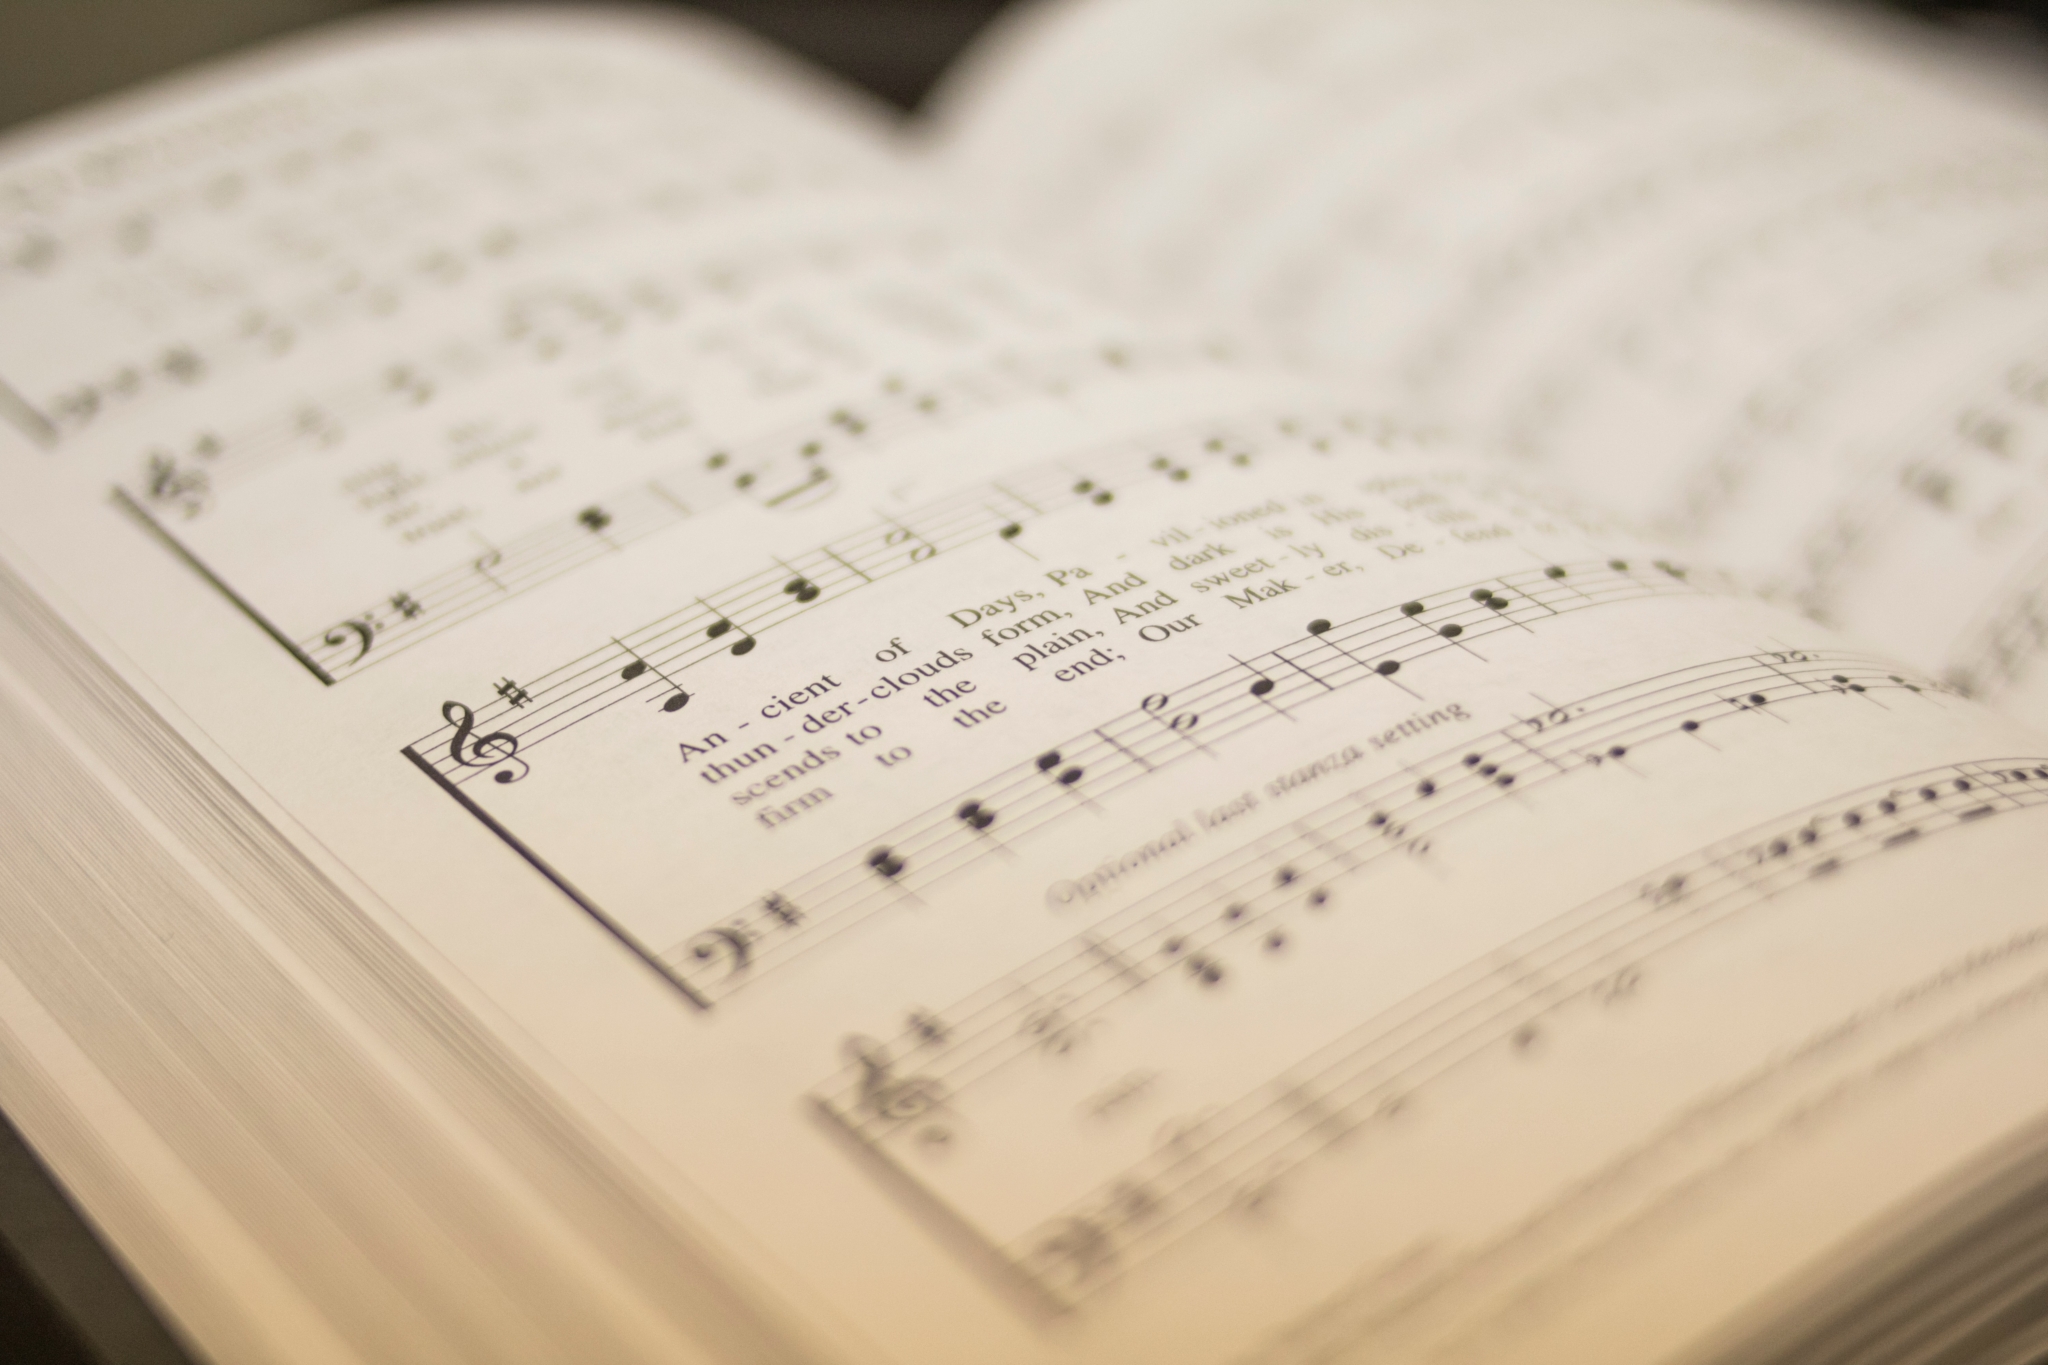 singing hymns is a great way to remember a loved one this holiday season